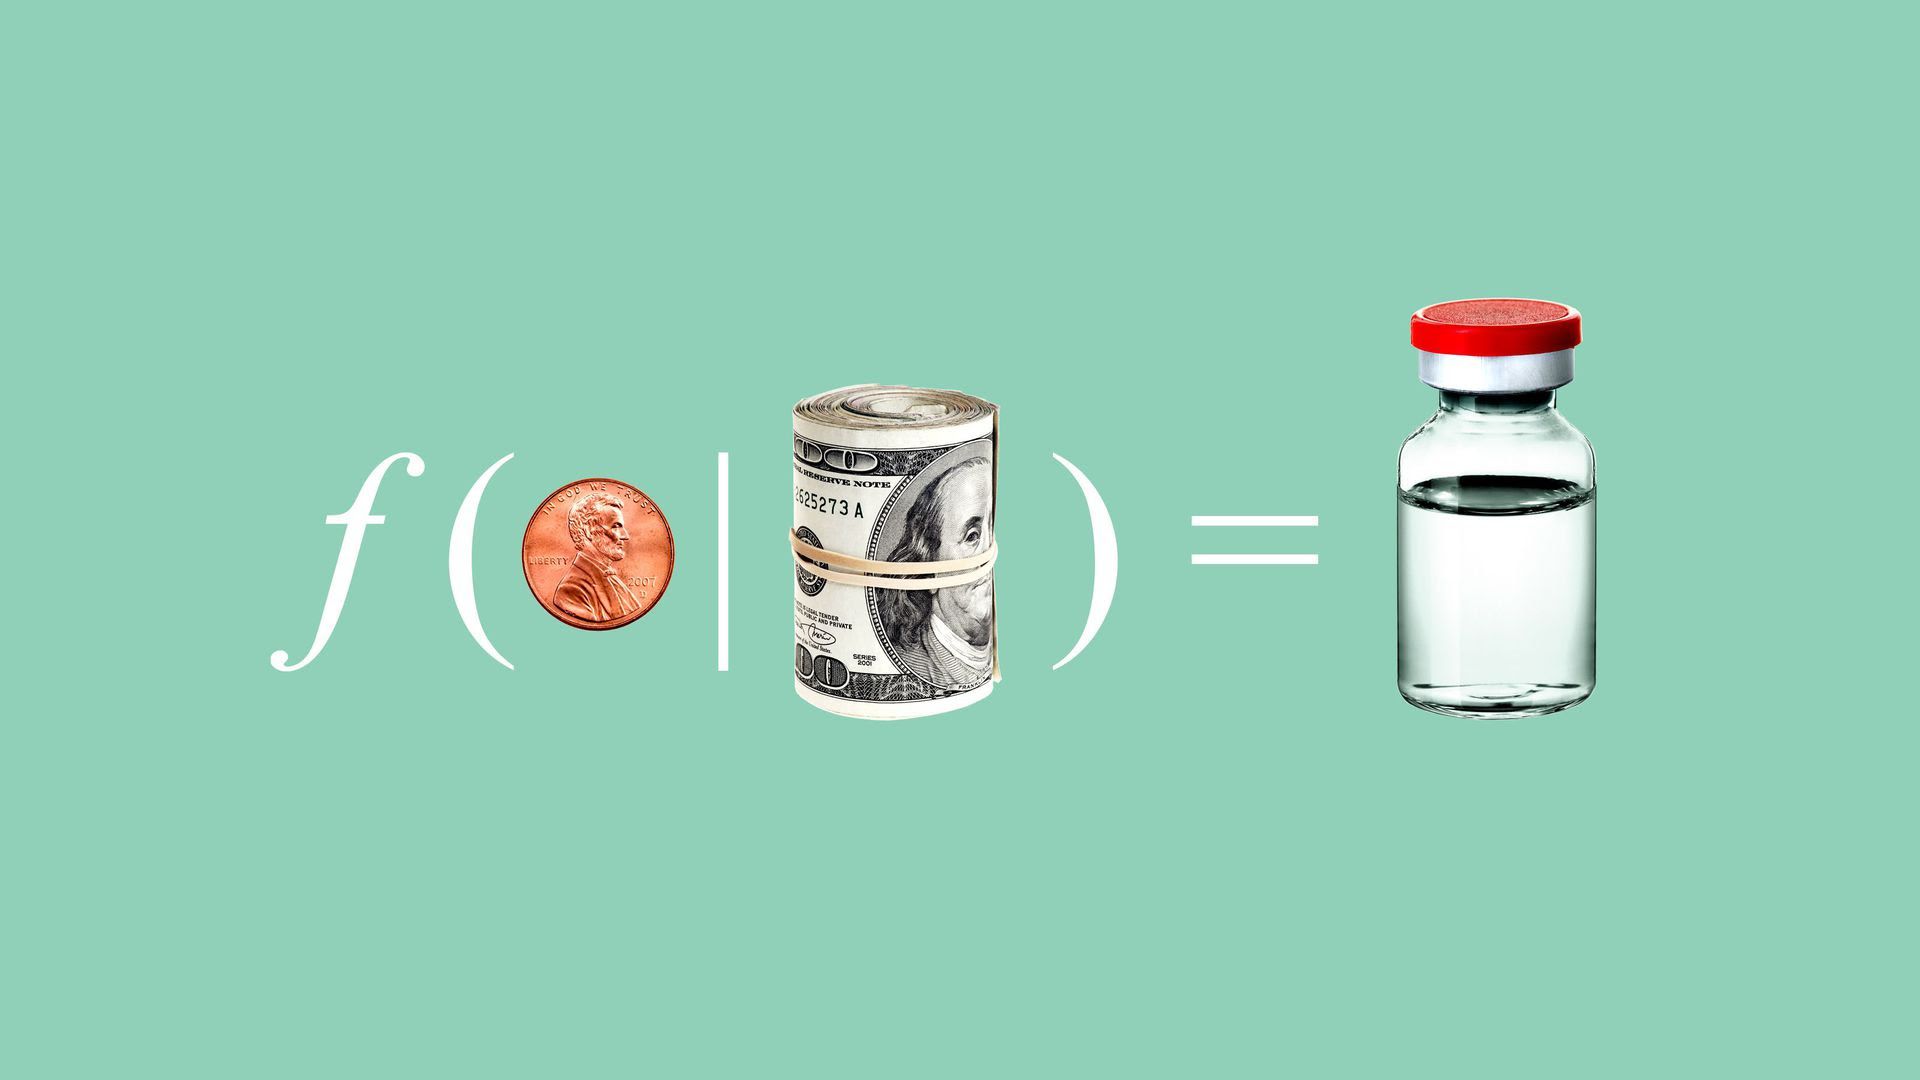 Illustration of an equation involving medical supplies and money